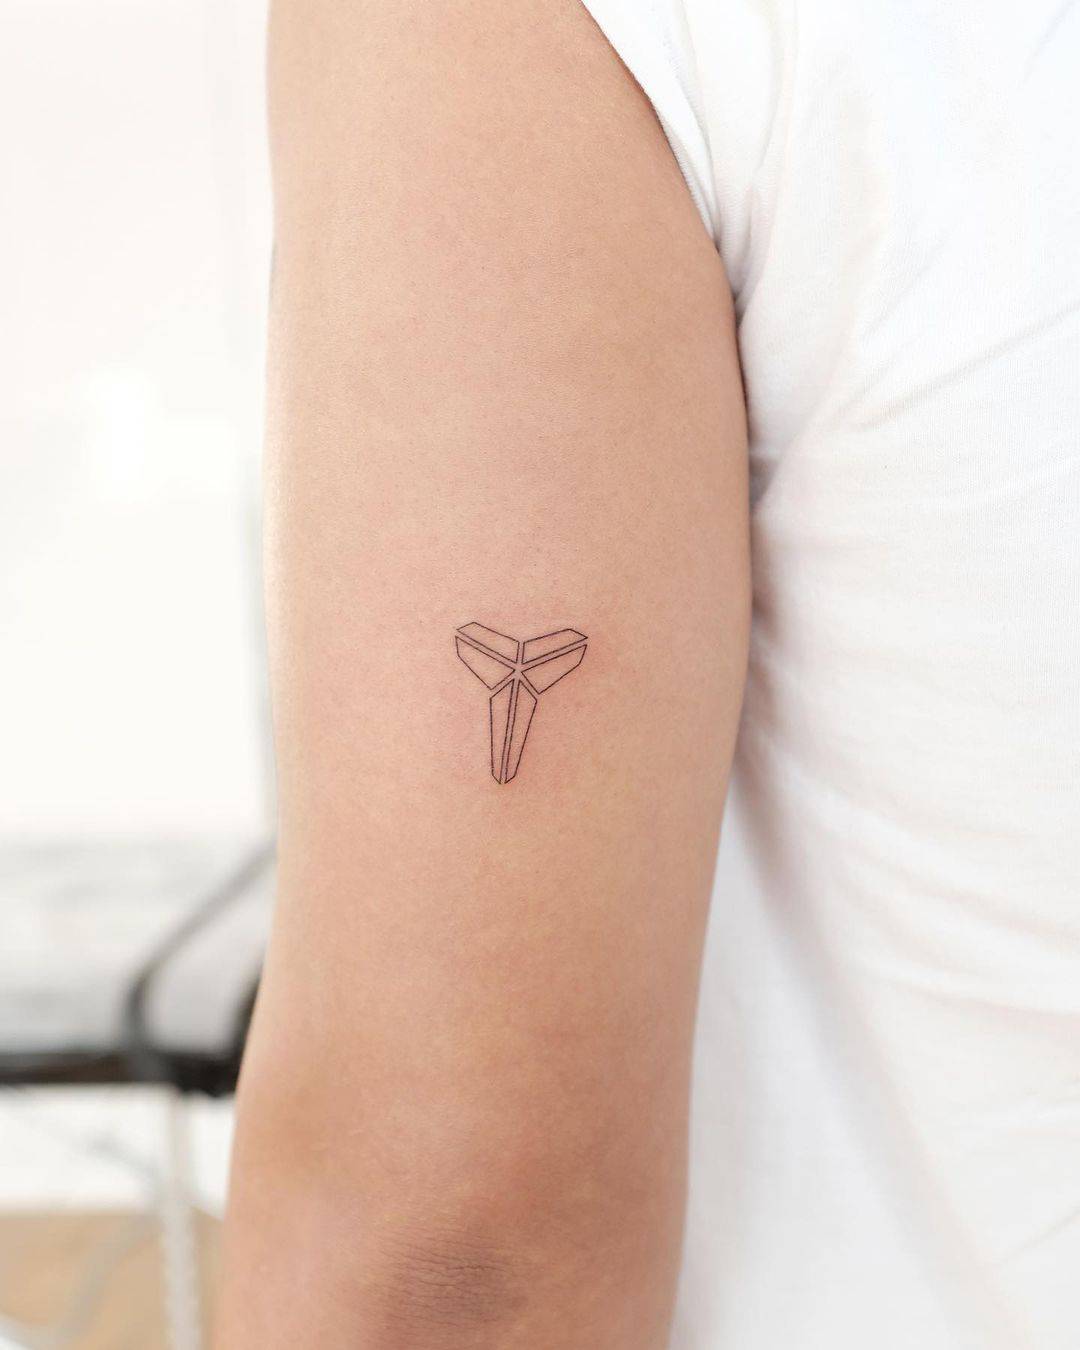 Simple tattoo on rm by lime tattoo